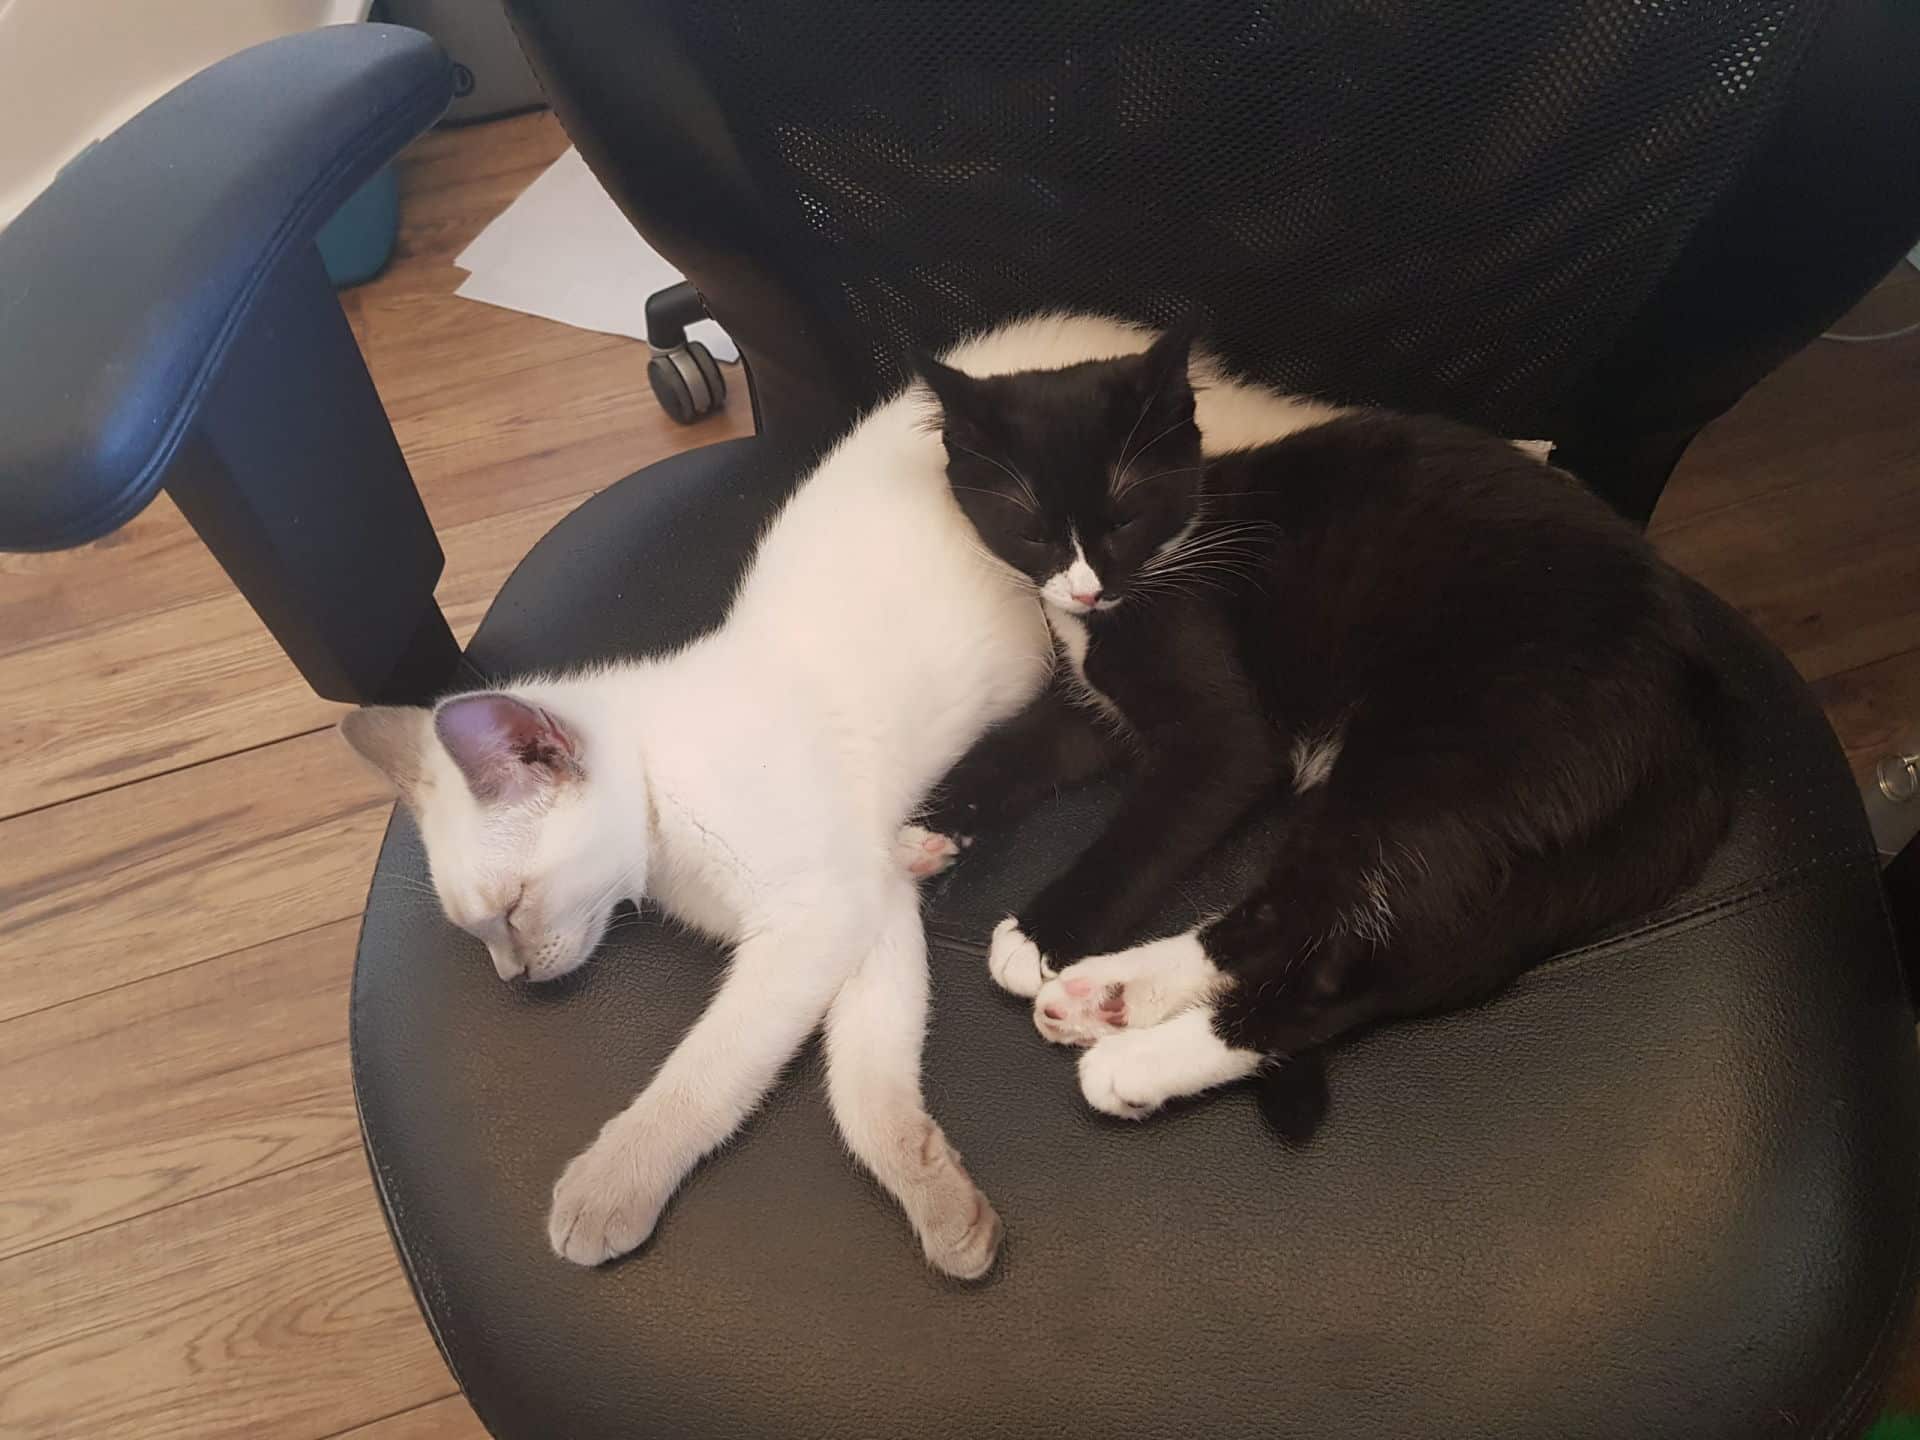 war room most pet friendly office in canada kittens sleeping on chairs